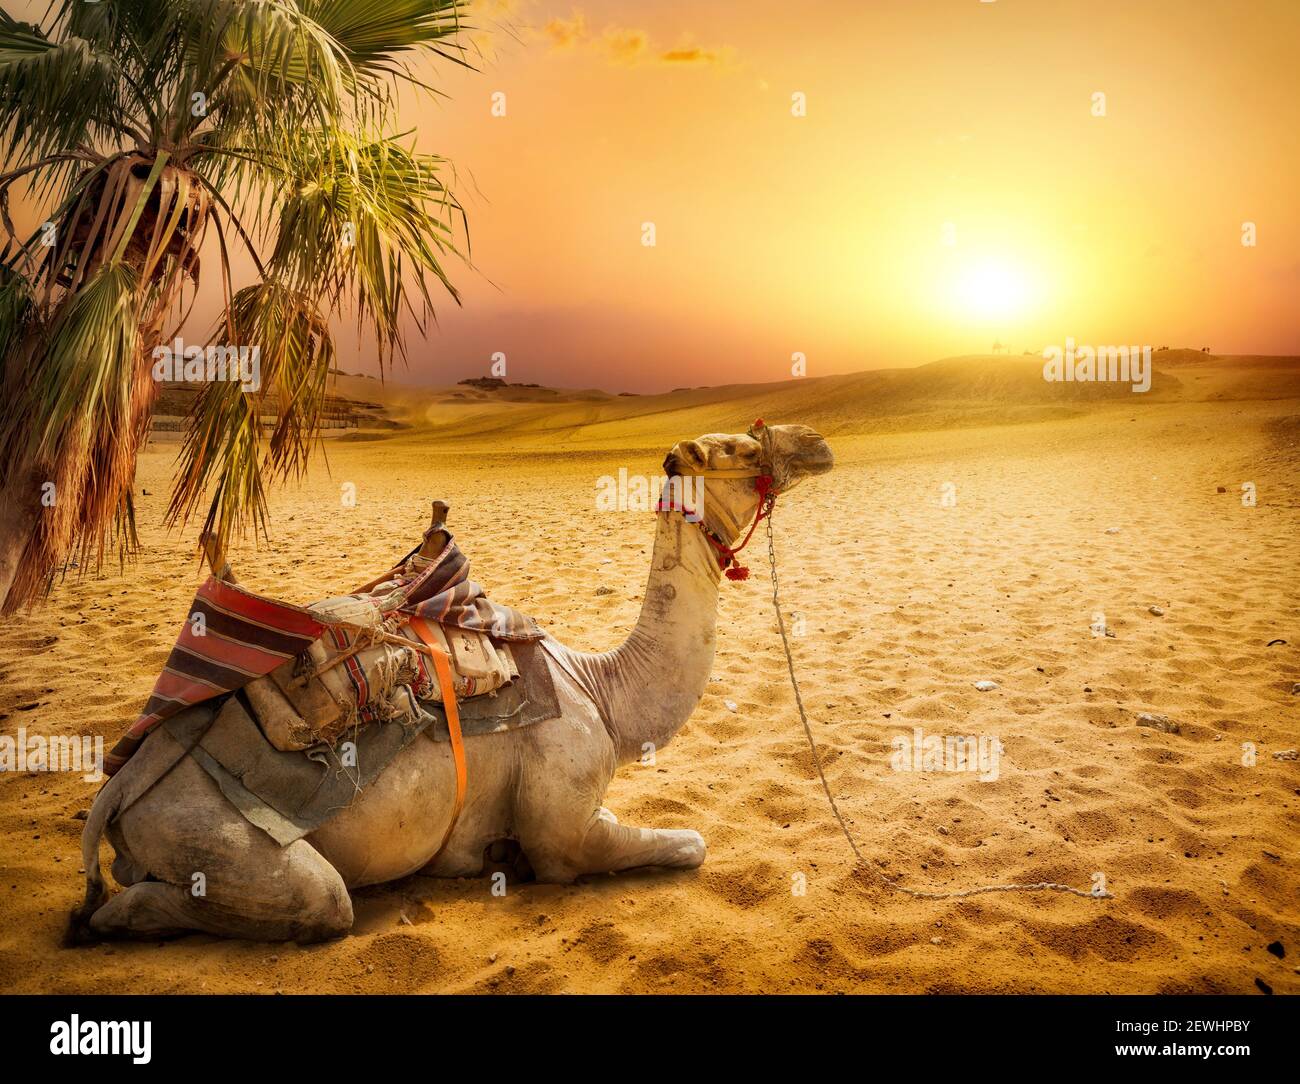 Camel resting under a palm tree in the desert of Egypt. Stock Photo